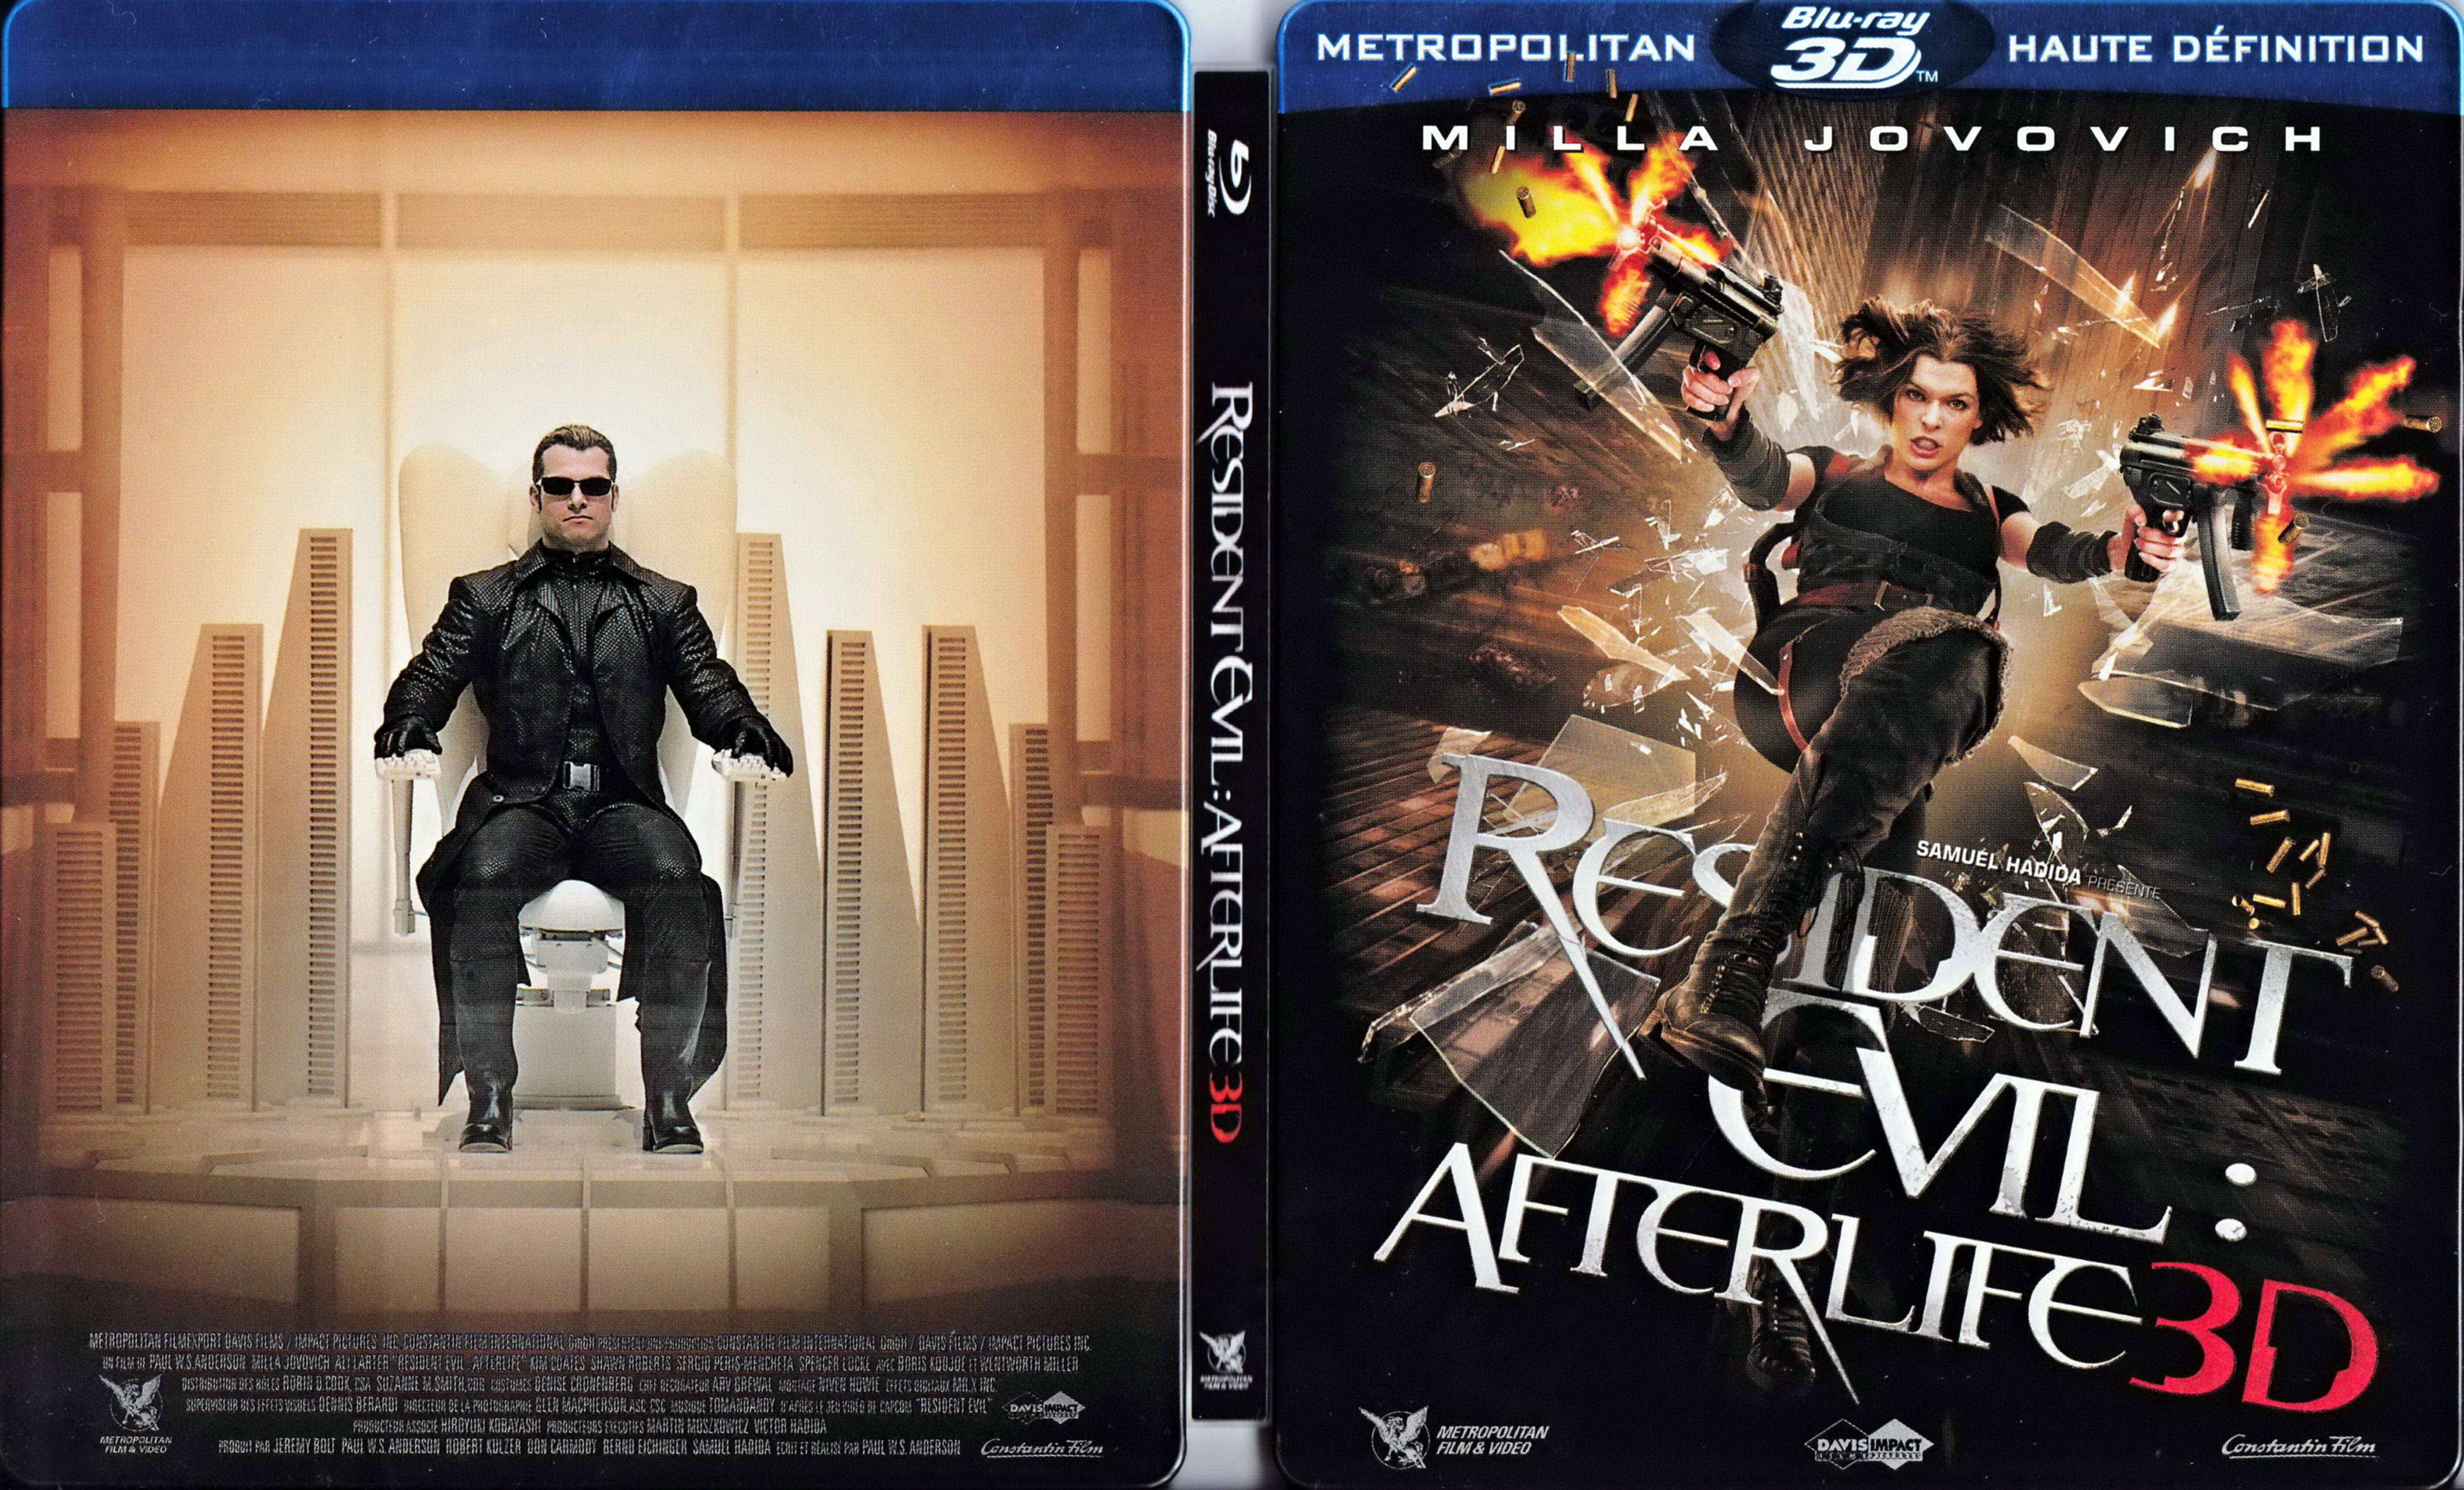 Jaquette DVD Resident Evil Afterlife 3D (BLU-RAY)